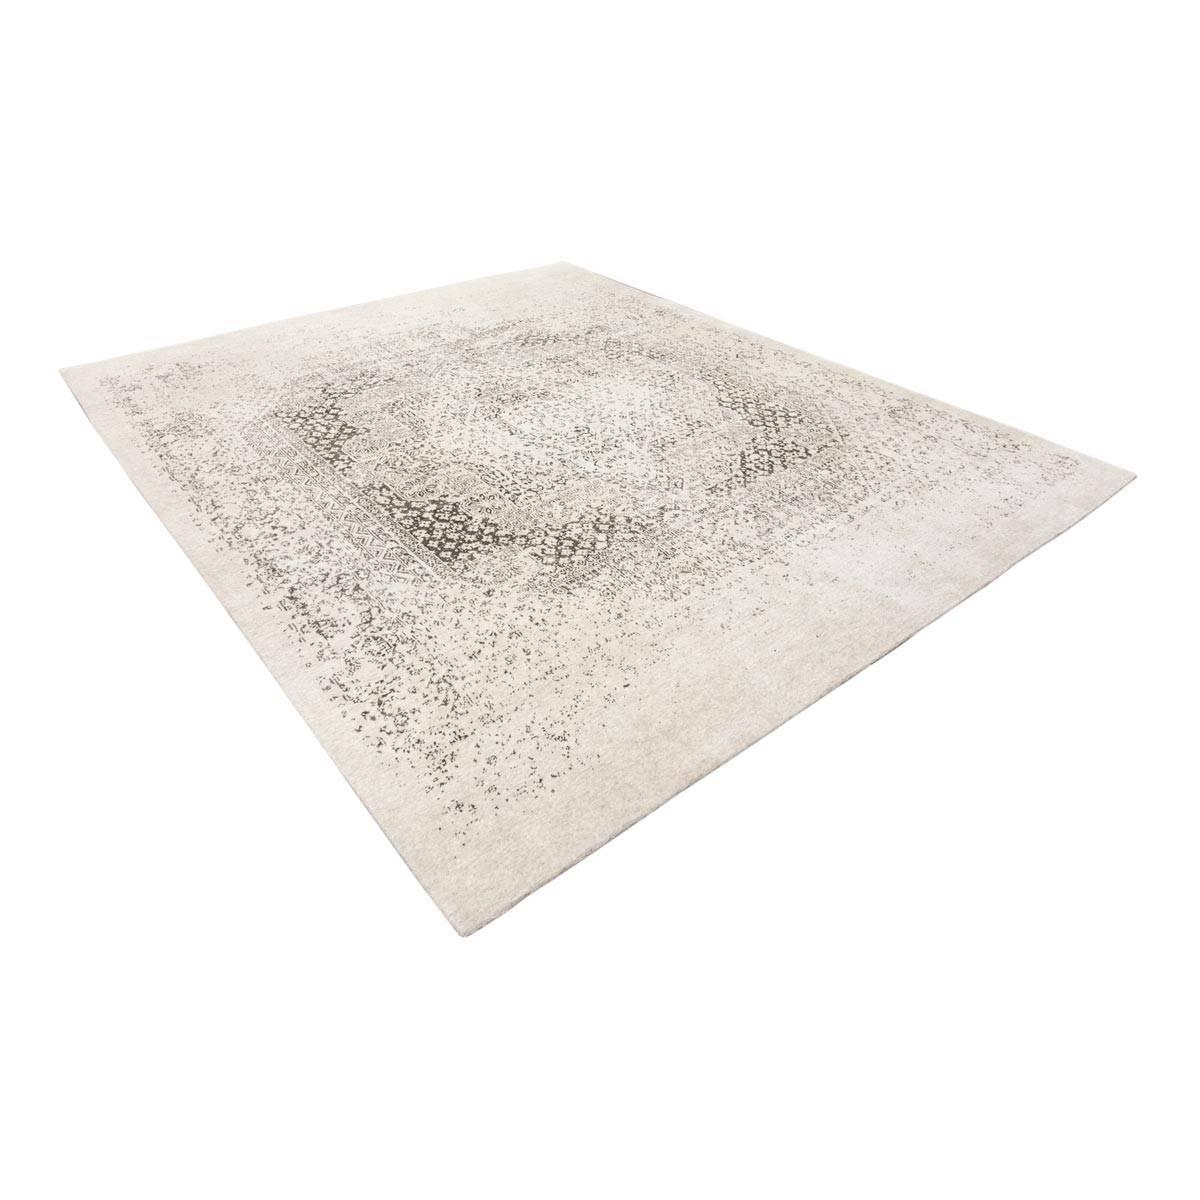 Abstract collection rug.
-Design taken from a Persian rug, disrupting the designs. Using white and gray in various intensity ranges.
-To be elaborated by hand its shades are not uniform so combining with fabrics is much easier.
- Its modern